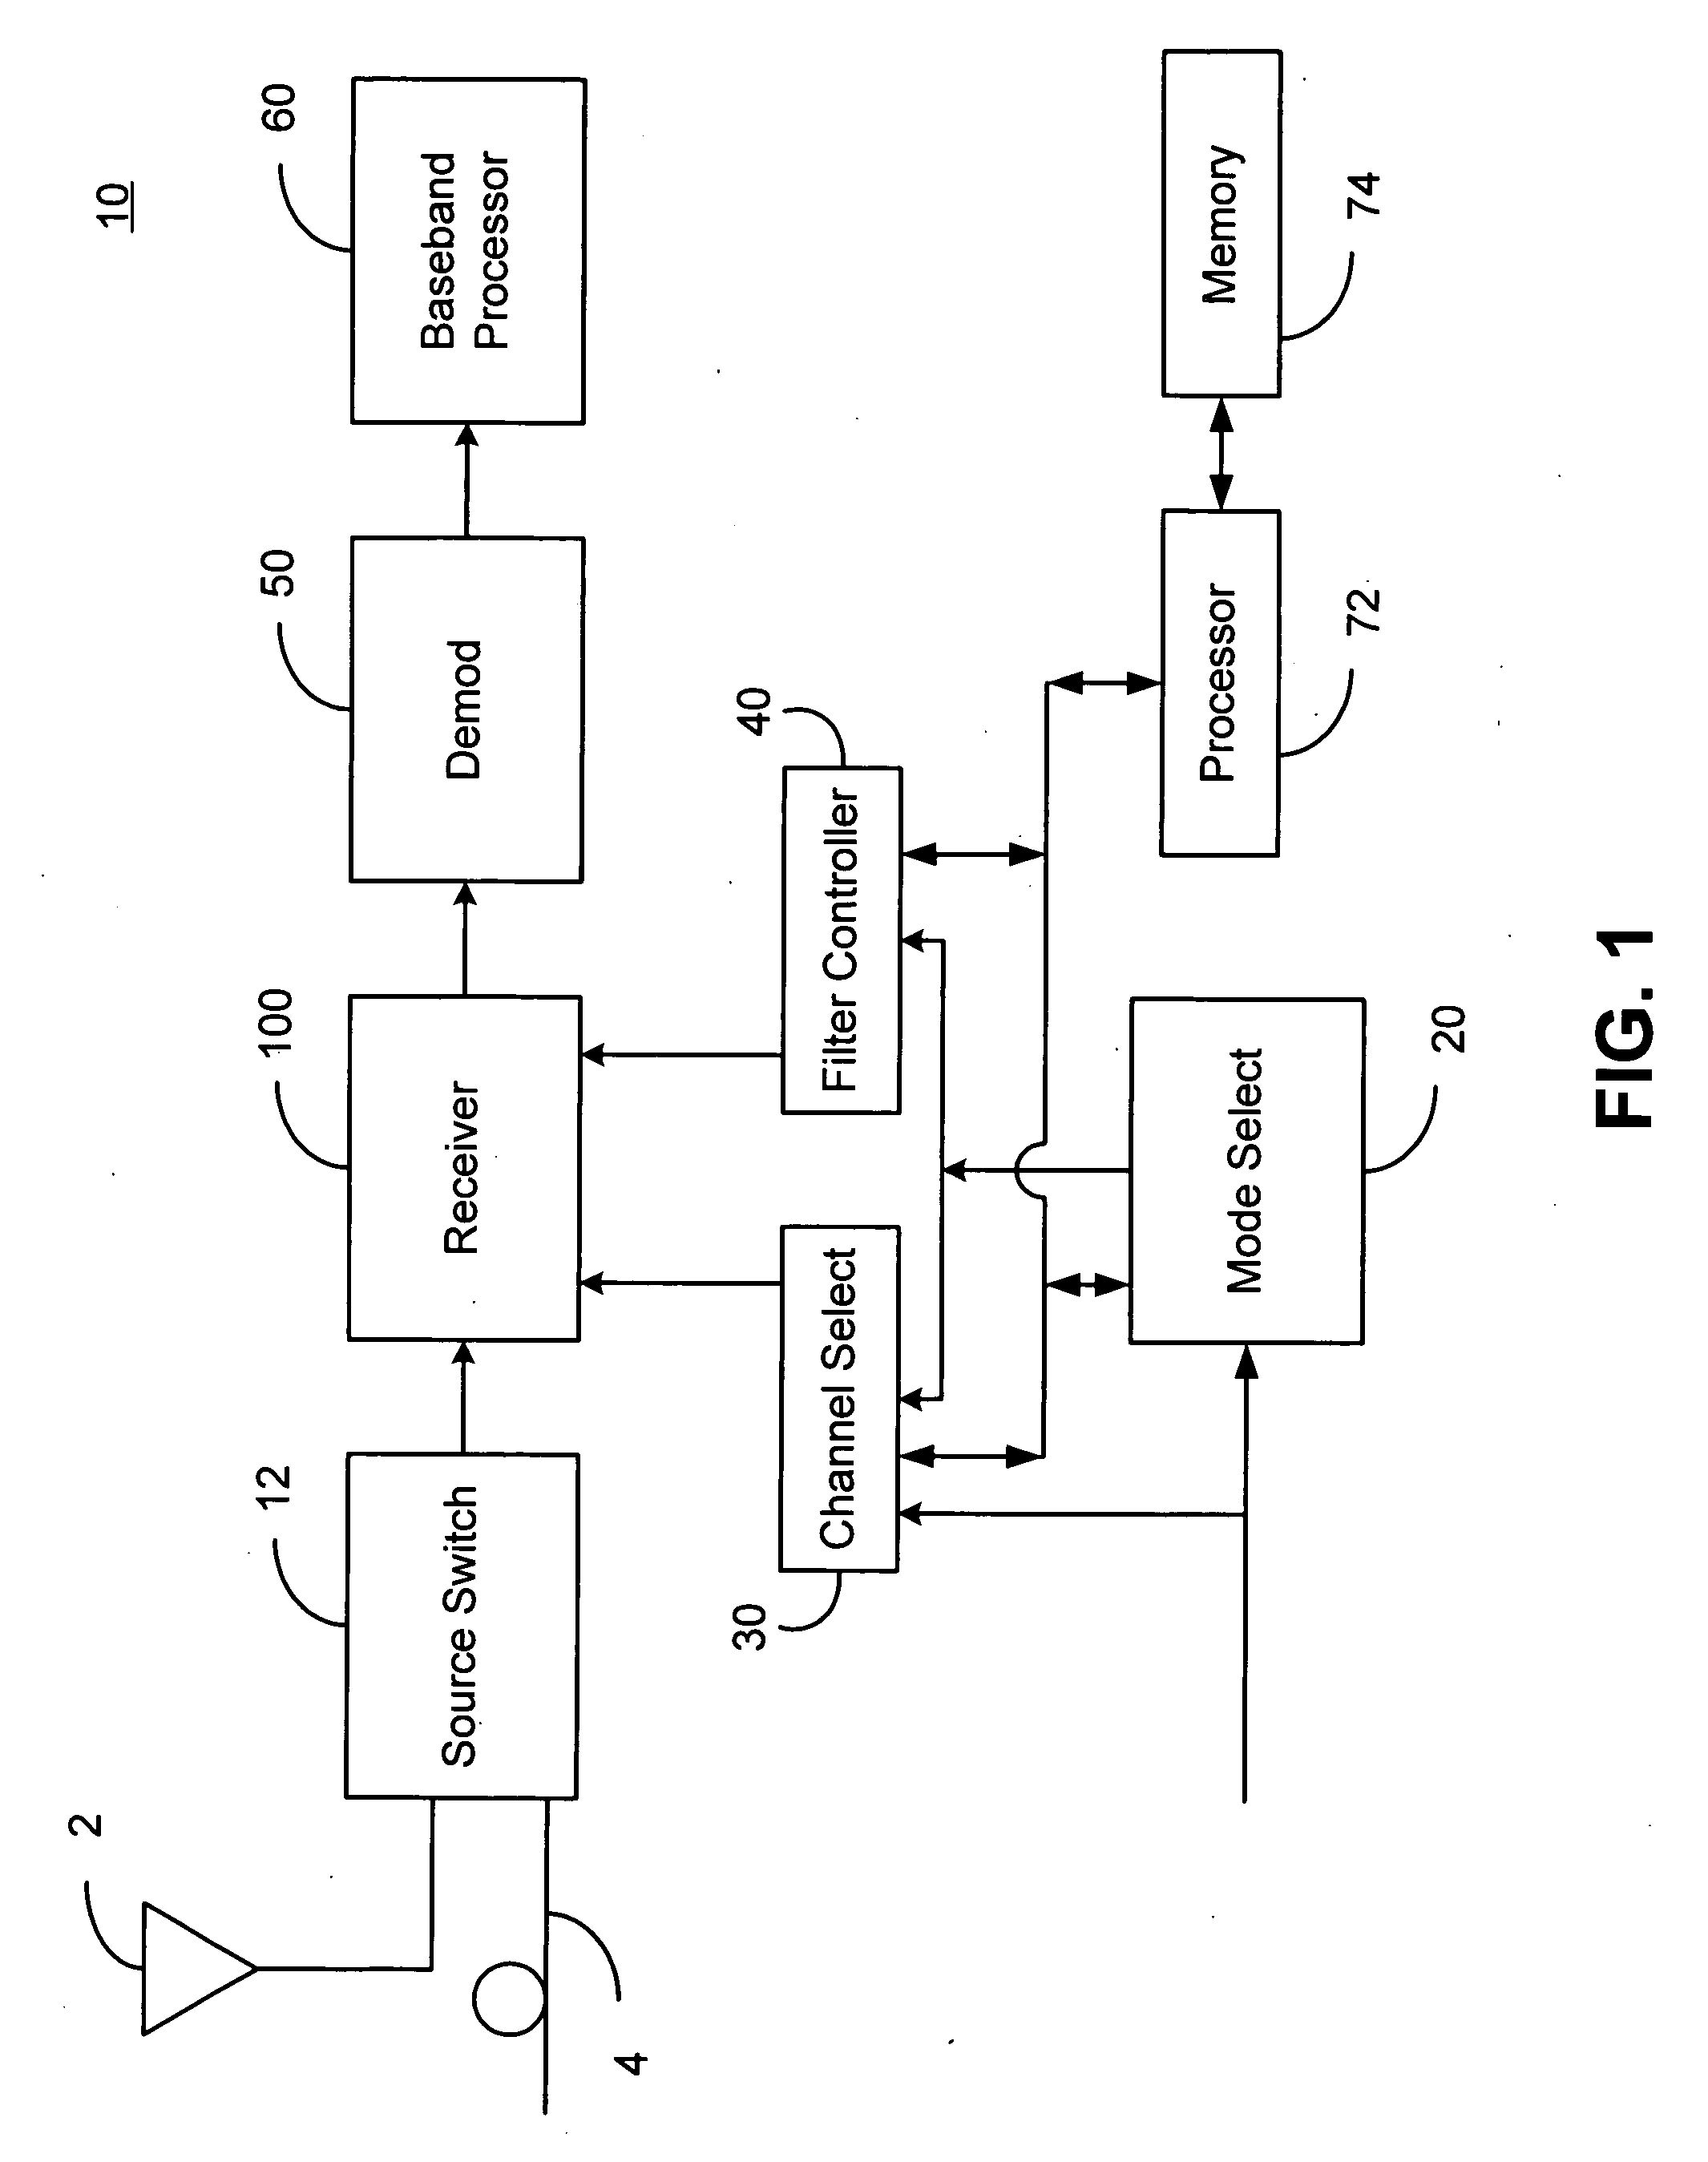 Receiver architecture with digitally generated intermediate frequency